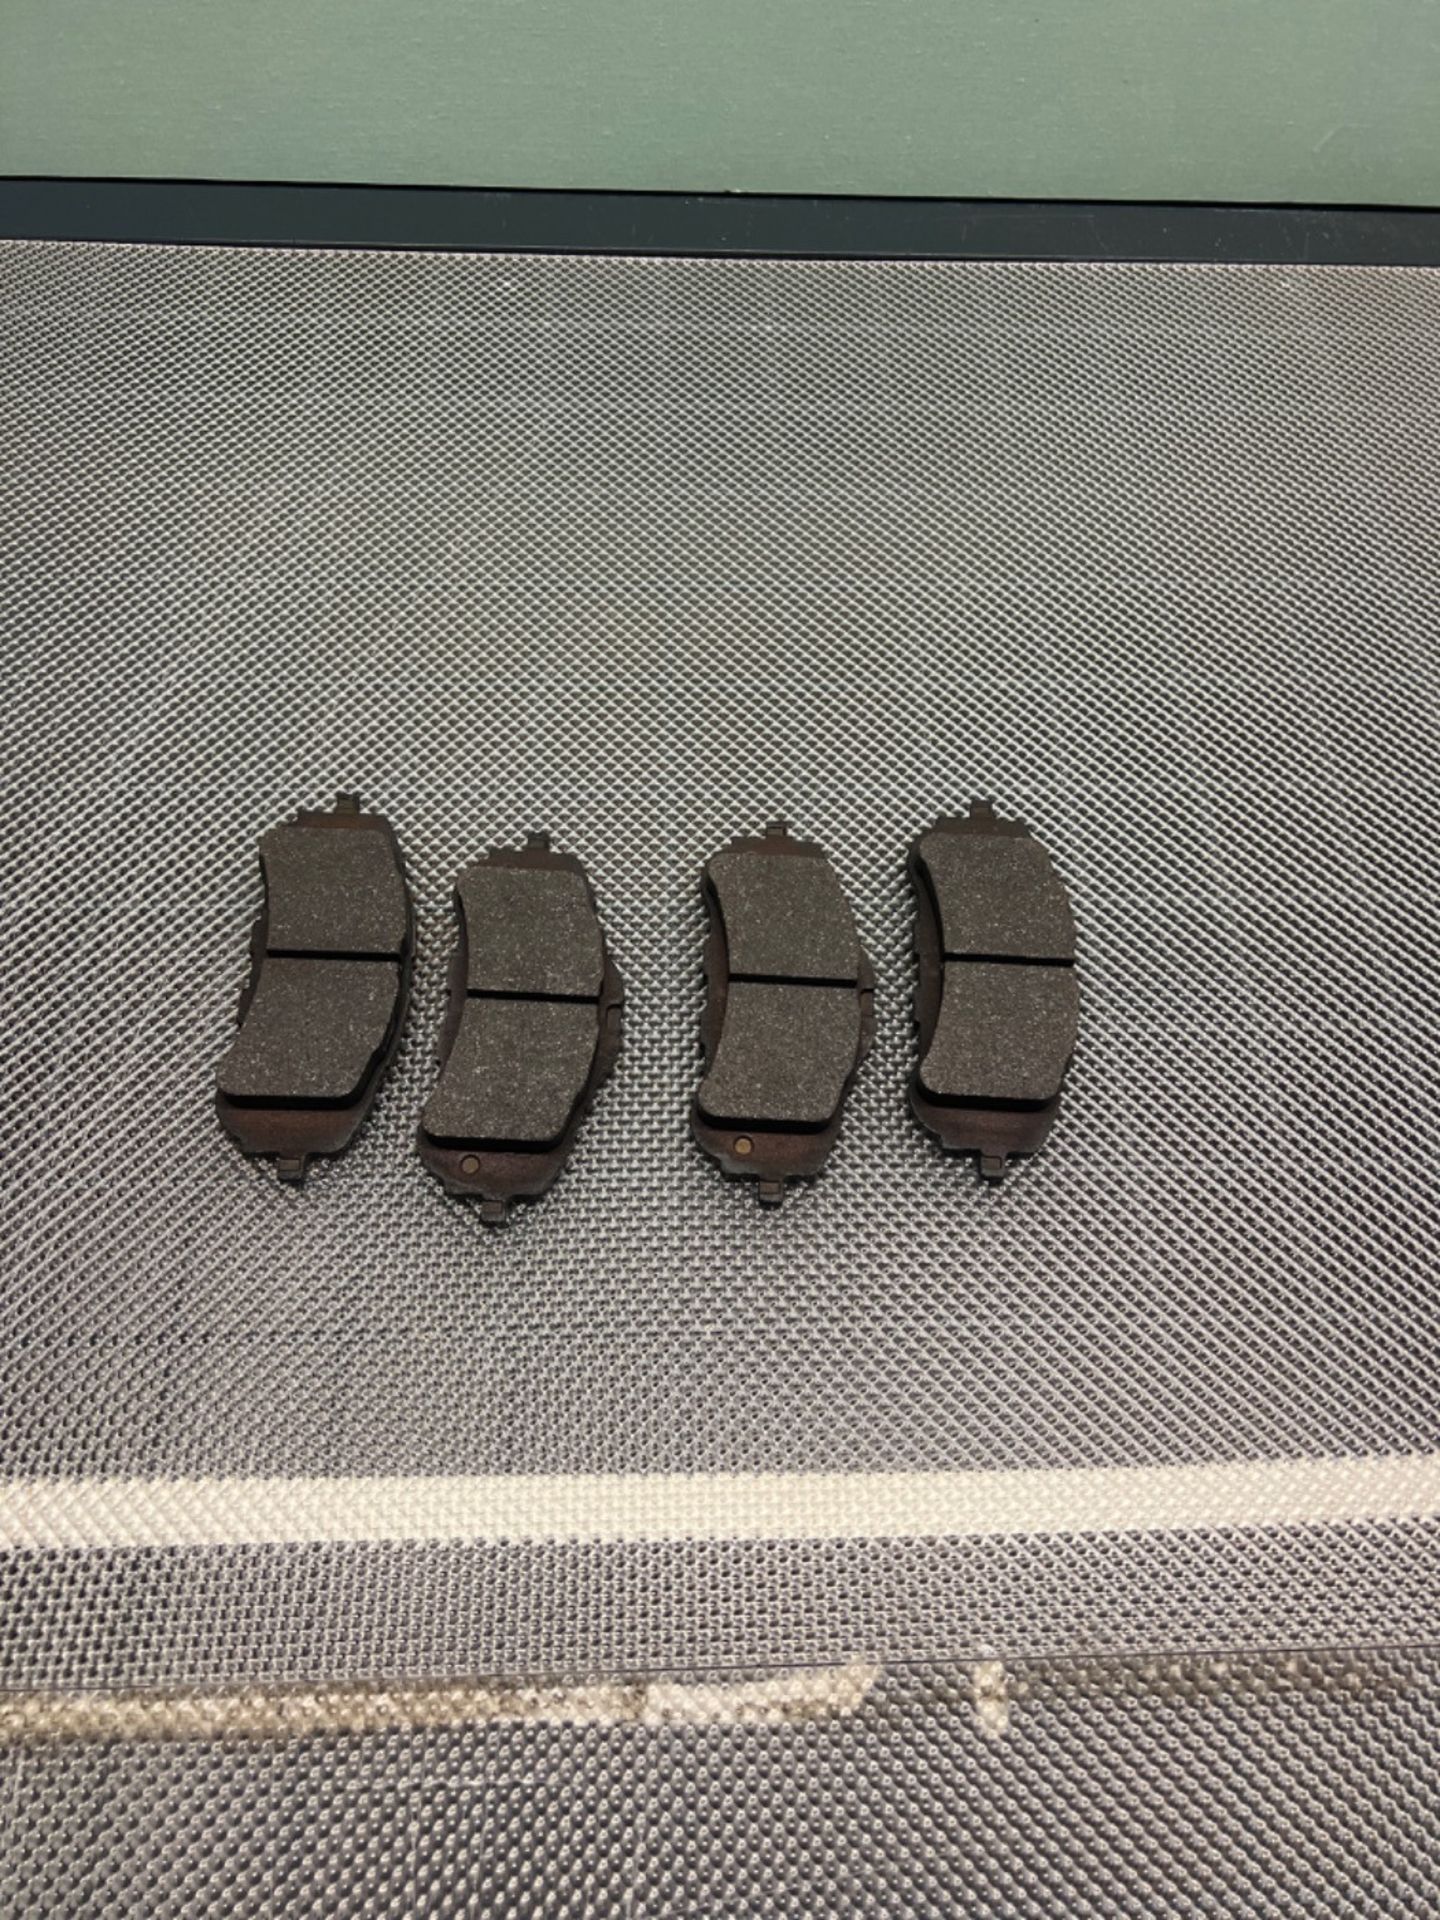 Bosch BP1709 Brake Pads - Front Axle - ECE-R90 Certified - 1 Set of 4 Pads - Image 2 of 3